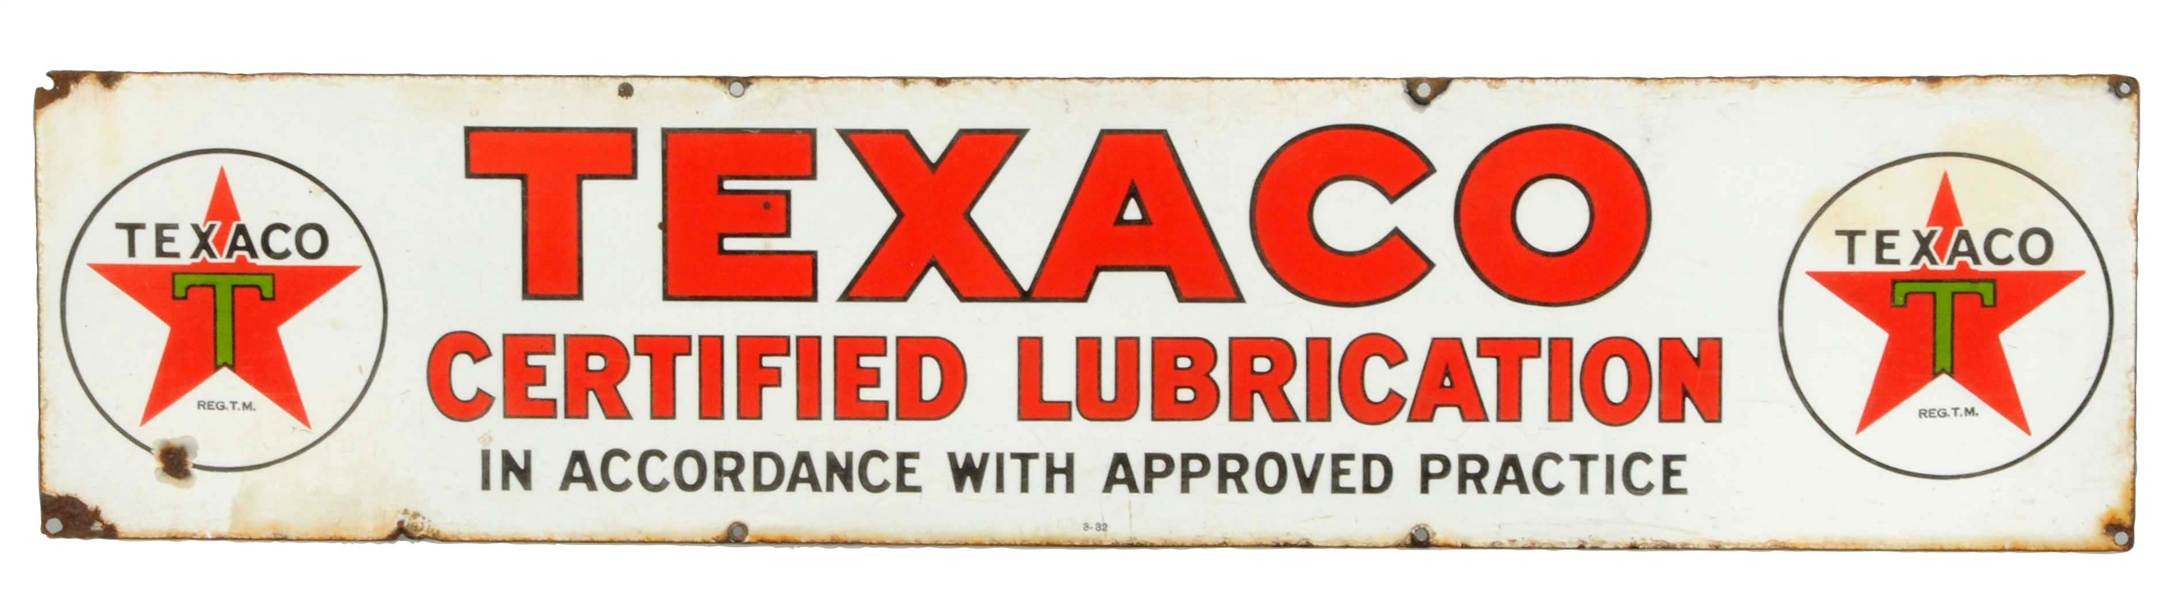 TEXACO (BLACK-T) CERTIFIED LUBRCATION PORCELAIN SIGN.